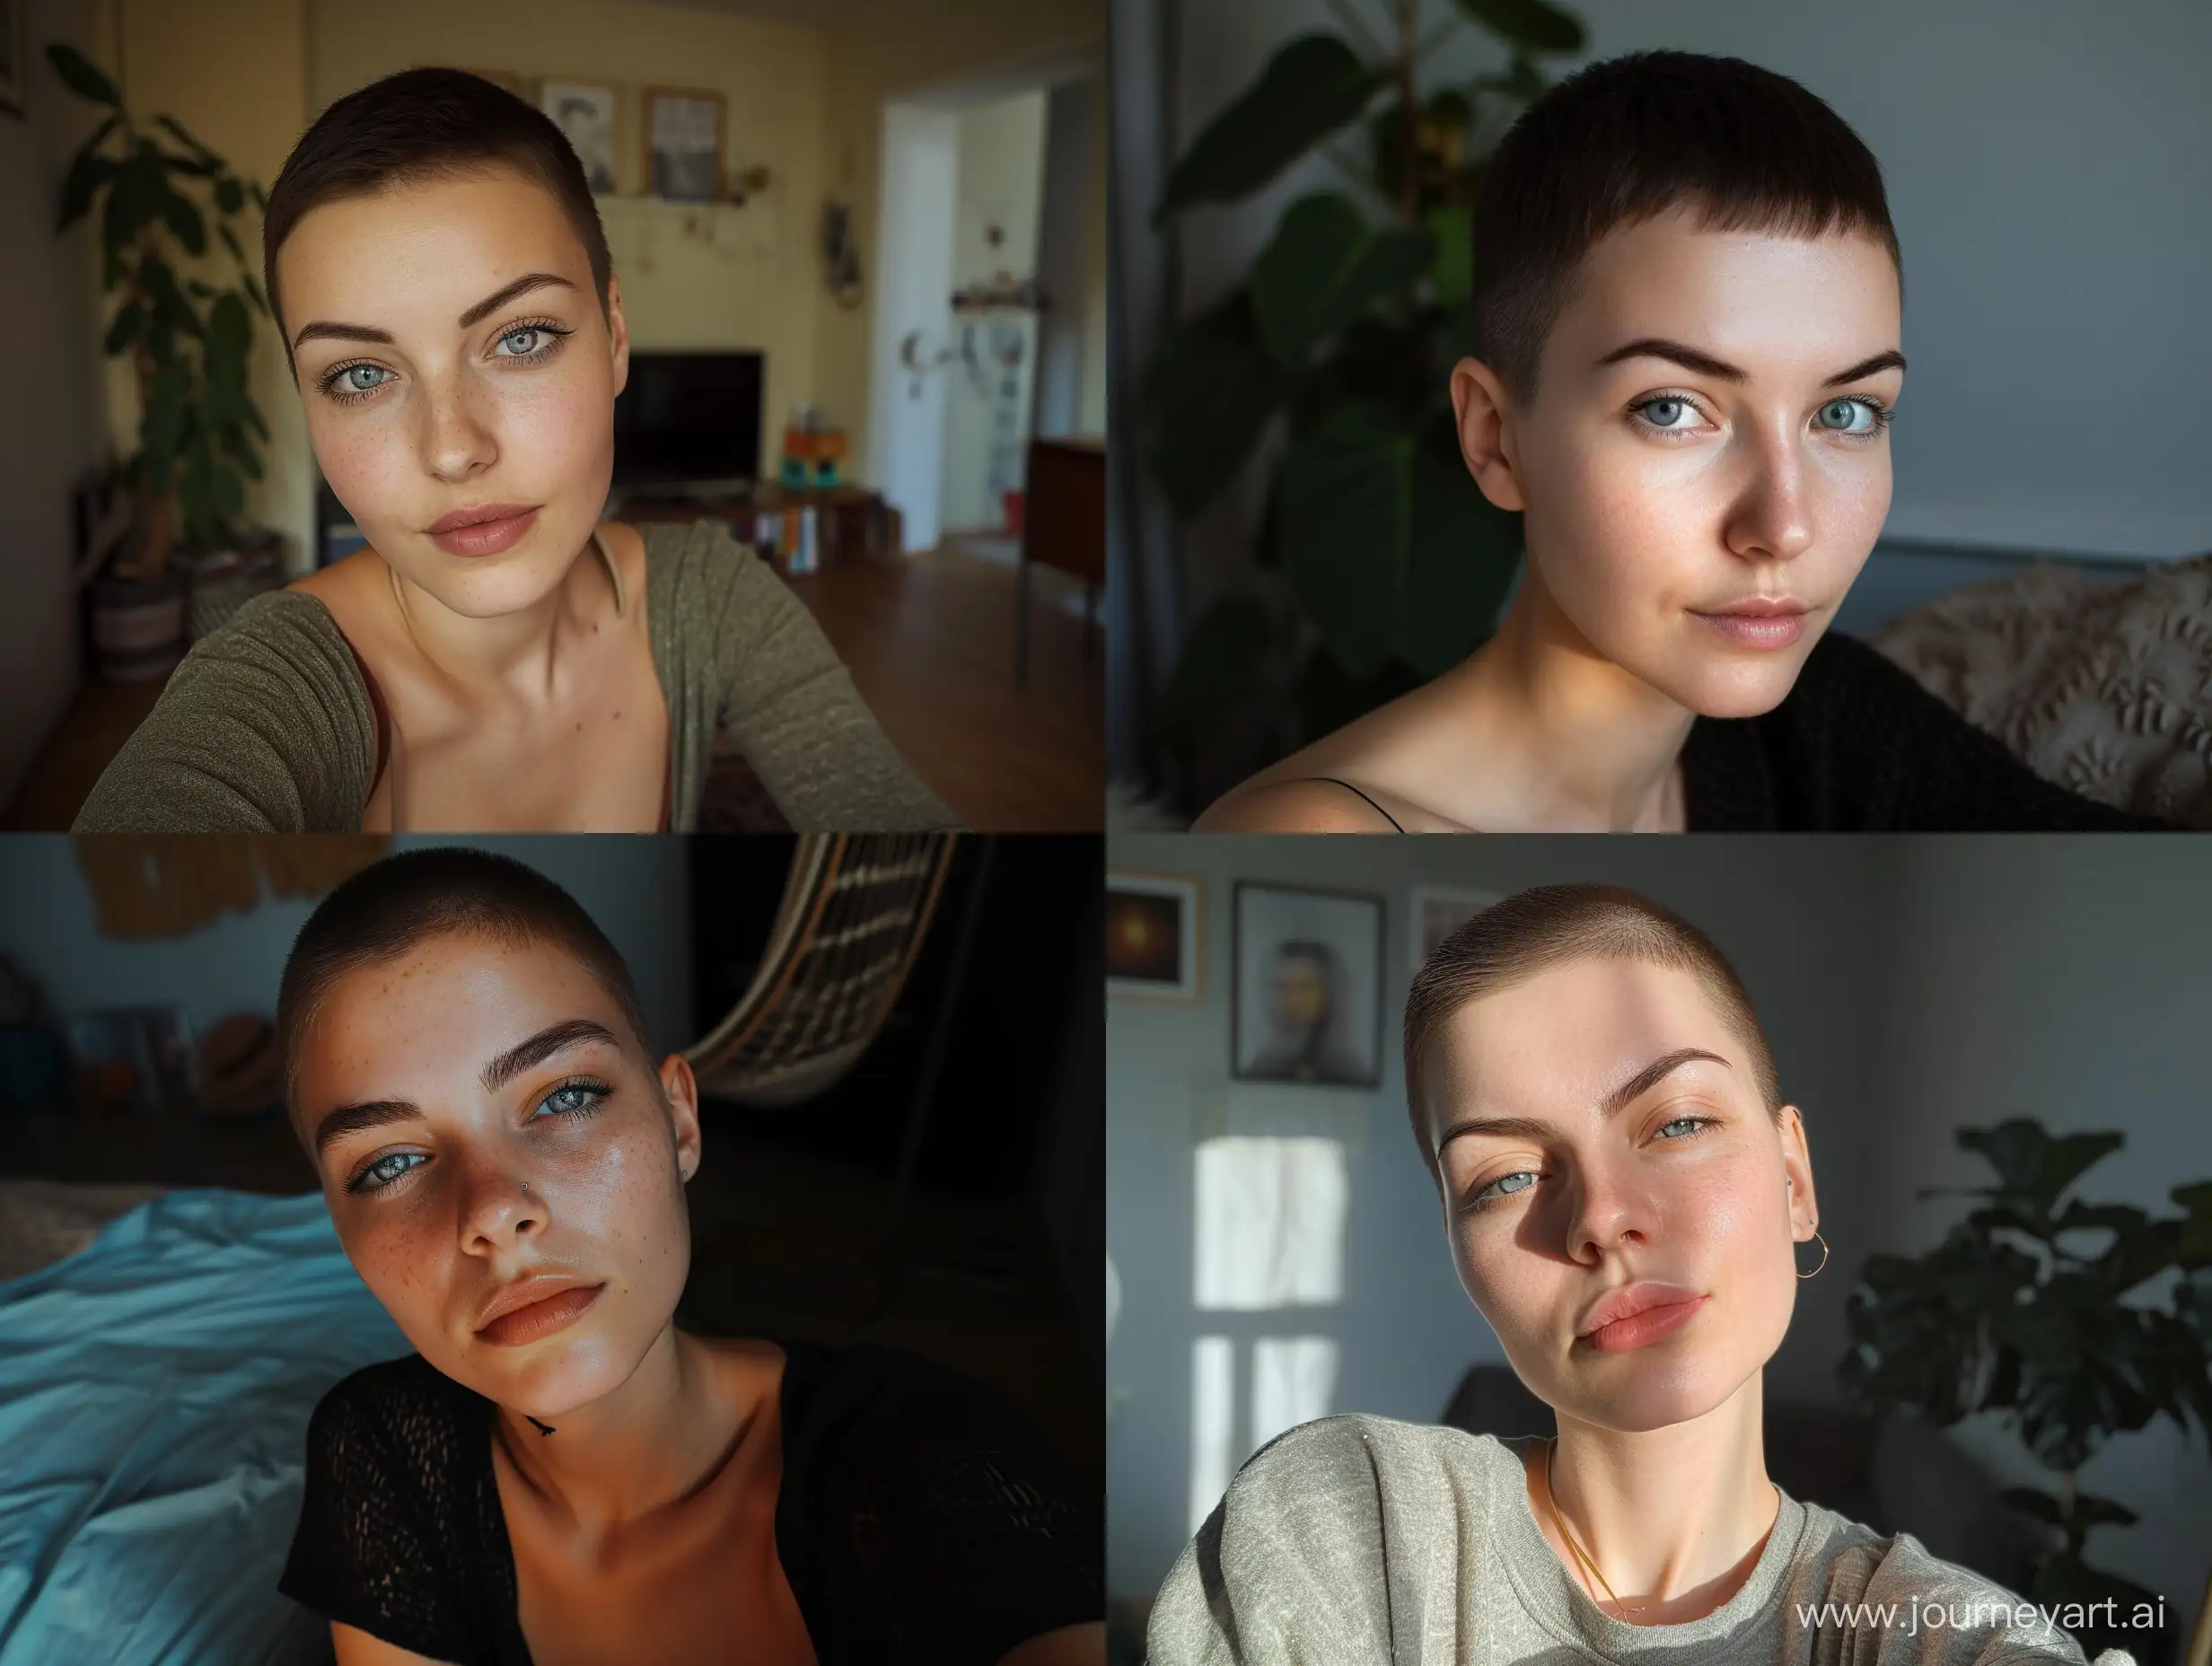 Captivating-Interior-Selfie-Woman-with-Short-Haircut-and-Grey-Eyes